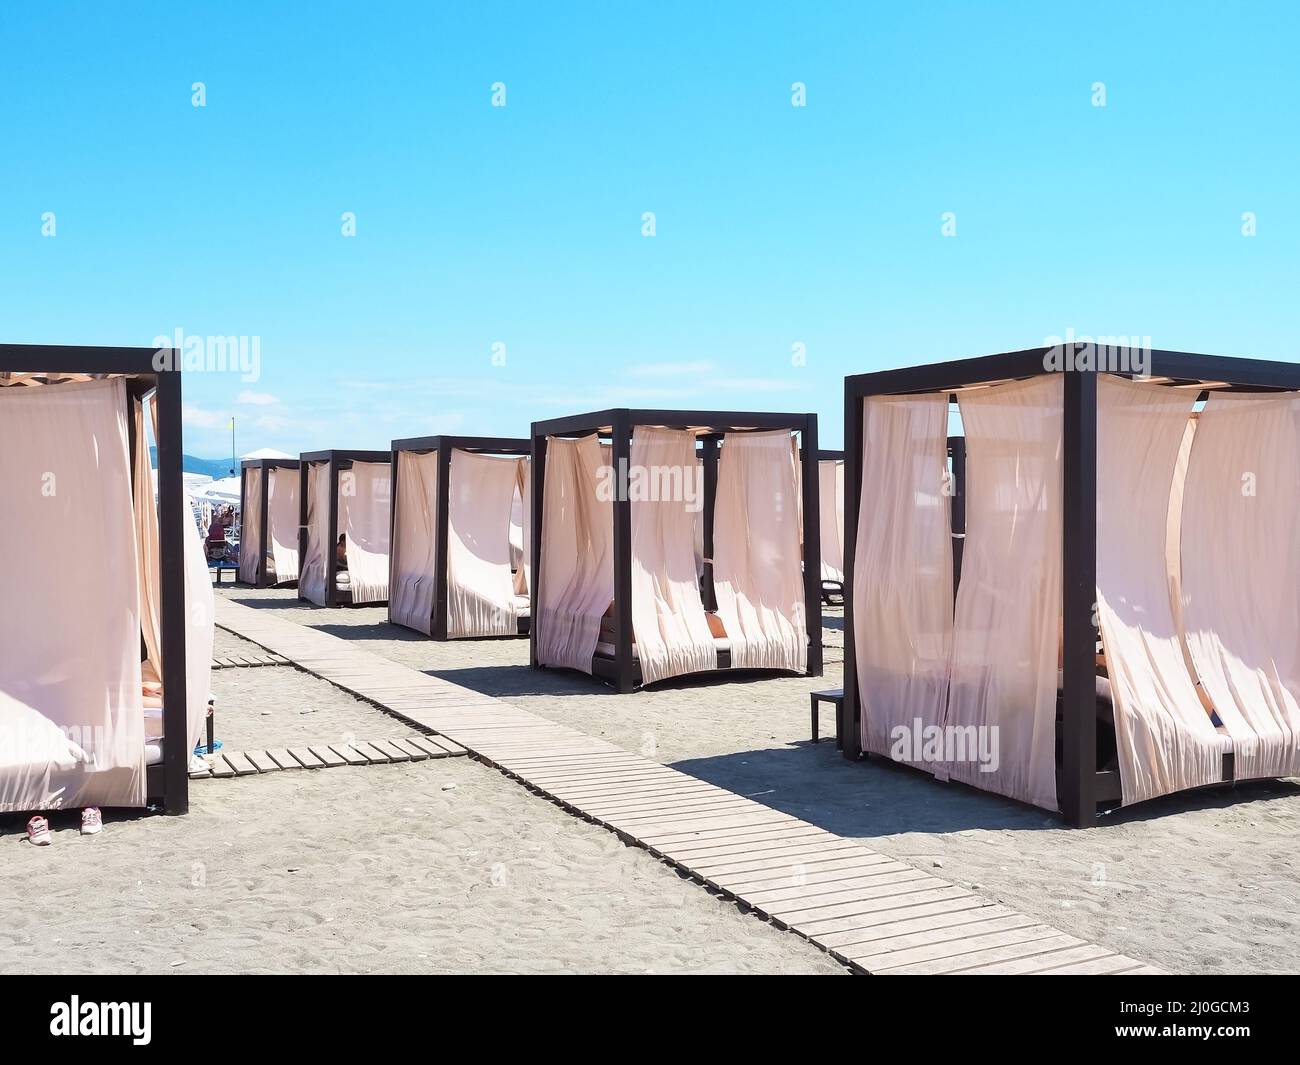 Beach cabins with a metal frame and light curtains stand in a row on the sand with wooden paths between them Stock Photo